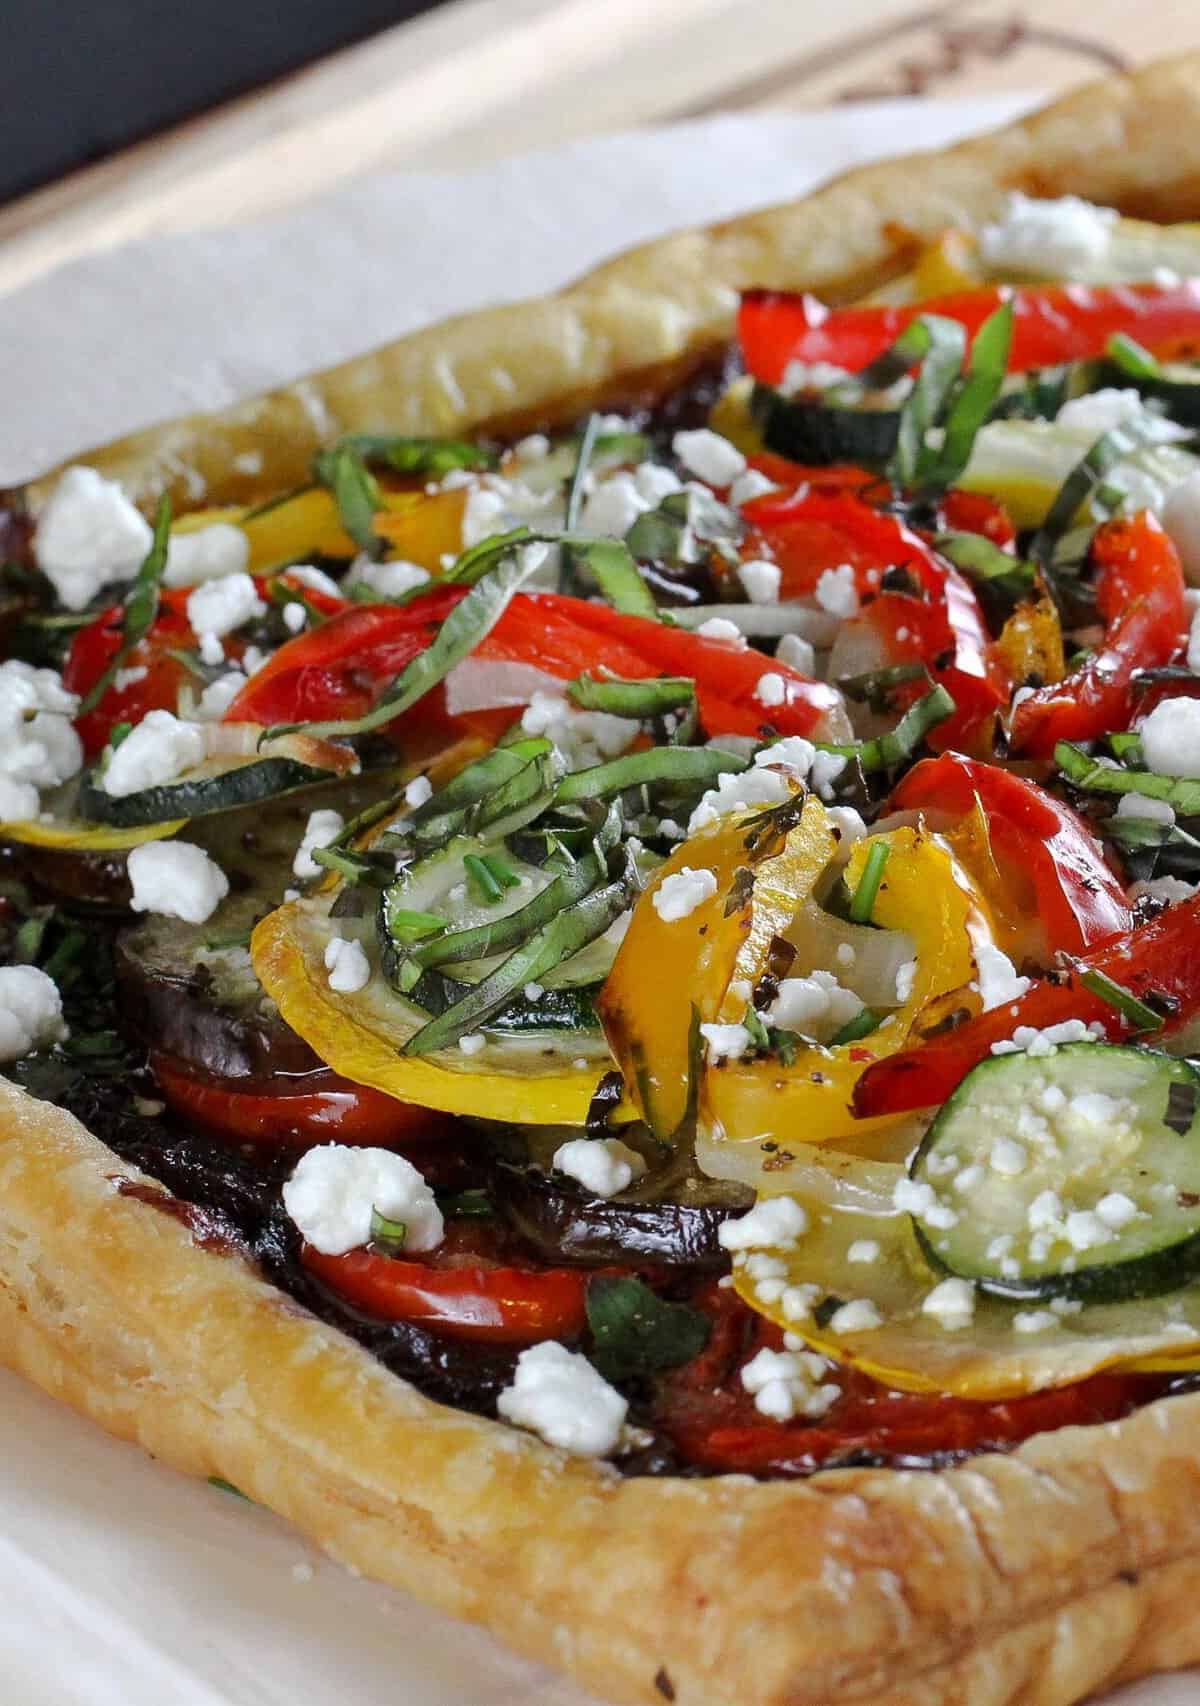  The crispy golden crust perfectly complements the tender and juicy vegetables